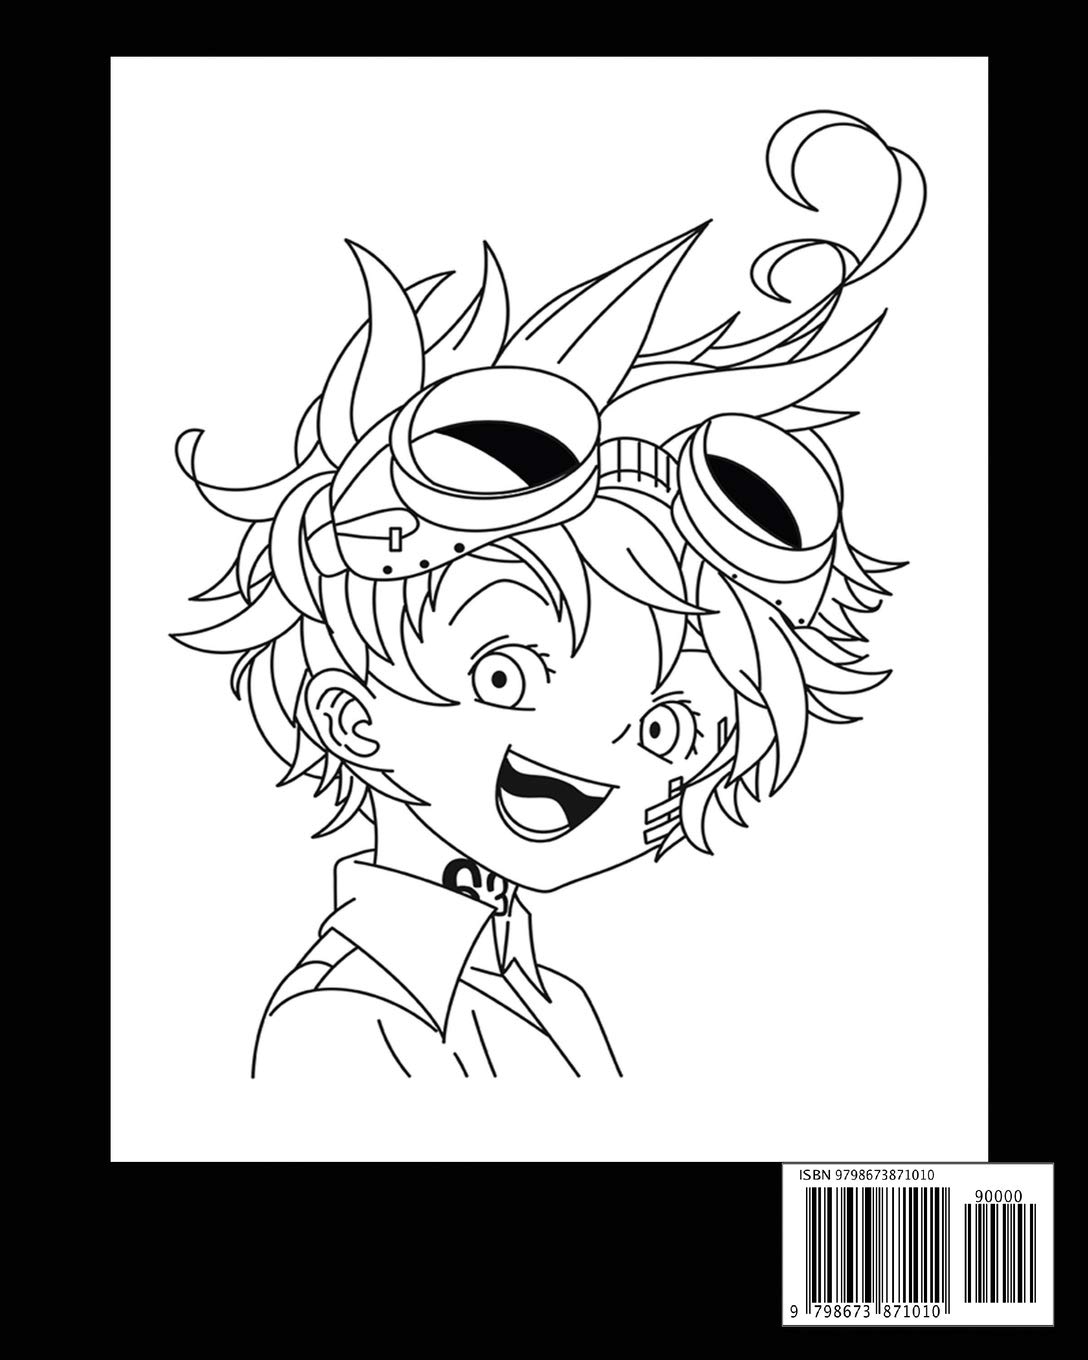 Amazon.com: The Promised Neverland Coloring Book: Yakusoku no Nebārando coloring  book for Kids and Adults & all fans (8 x 10): 9798673871010: stuff, anime:  Books